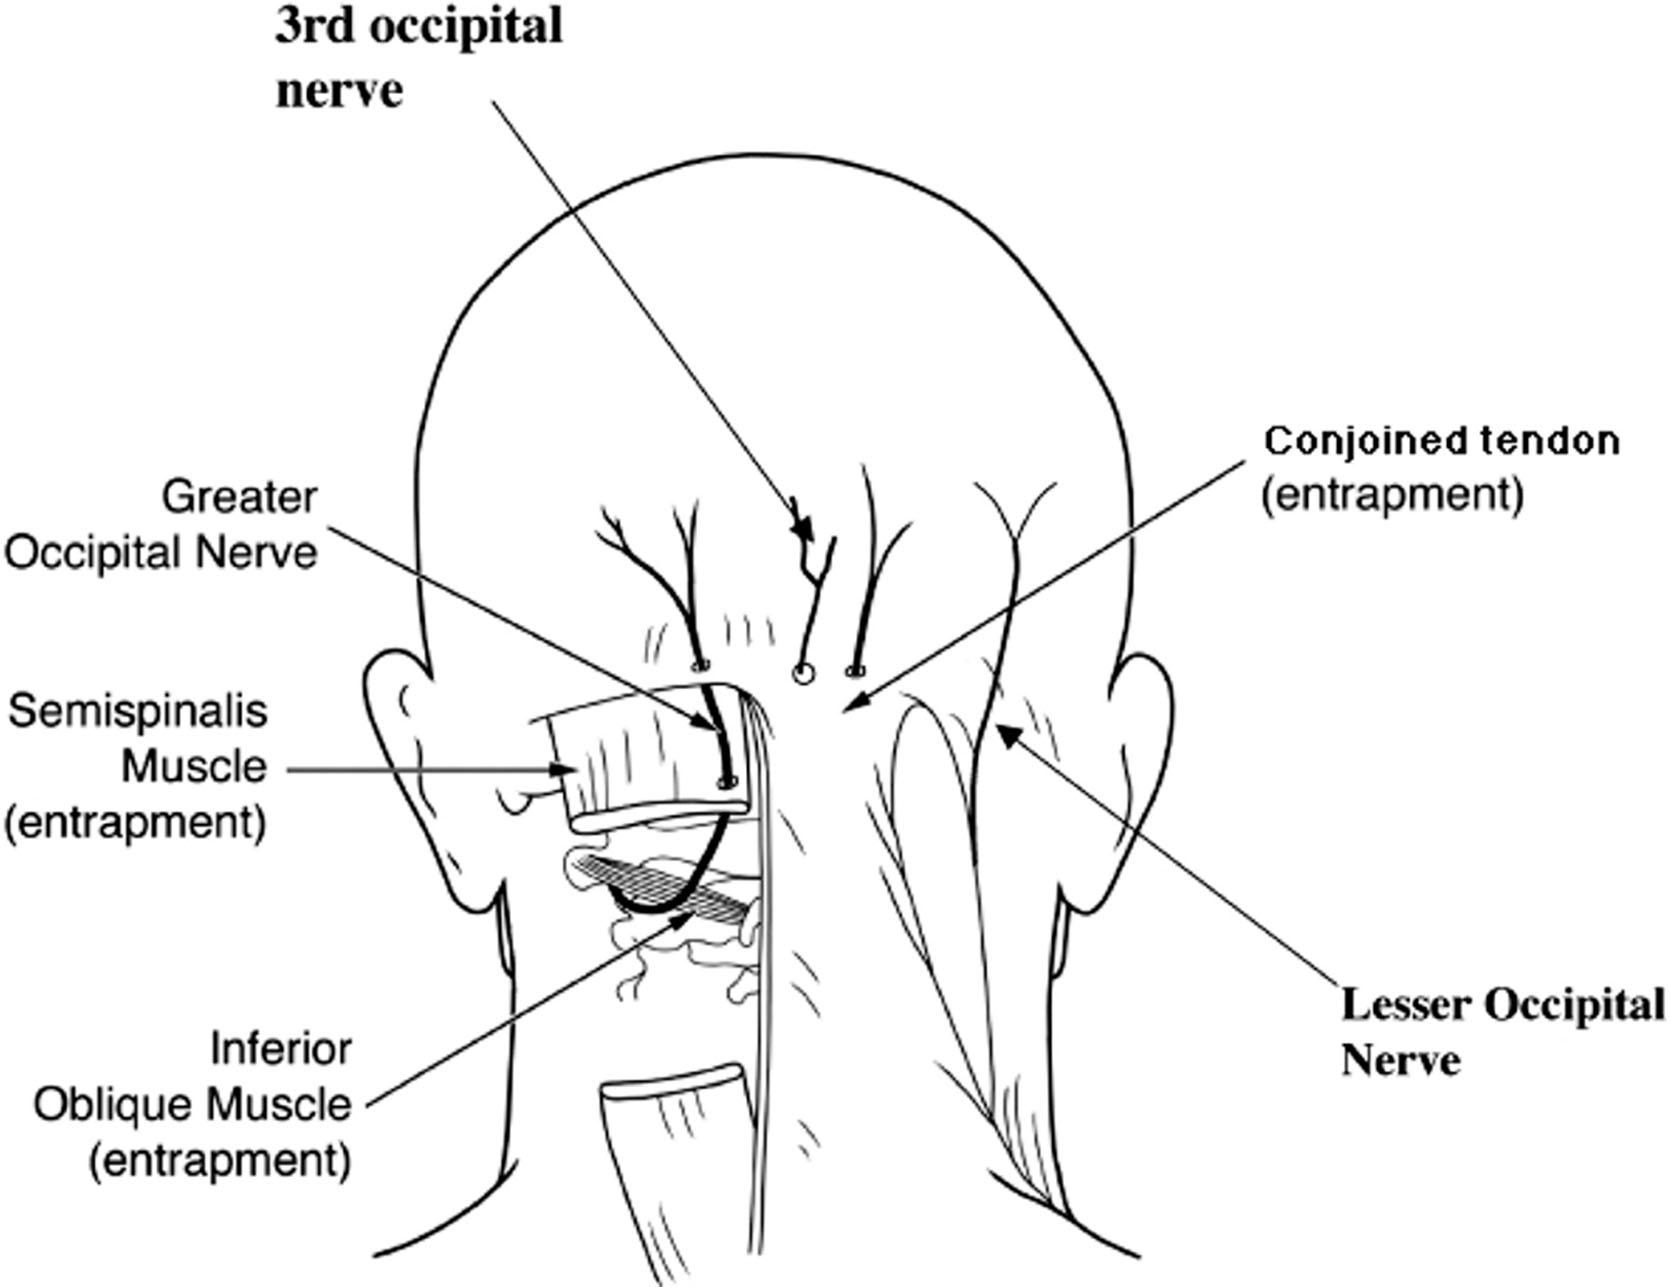 Figure 2.1, Greater, lessor, and third occipital nerves and their site of entrapment.